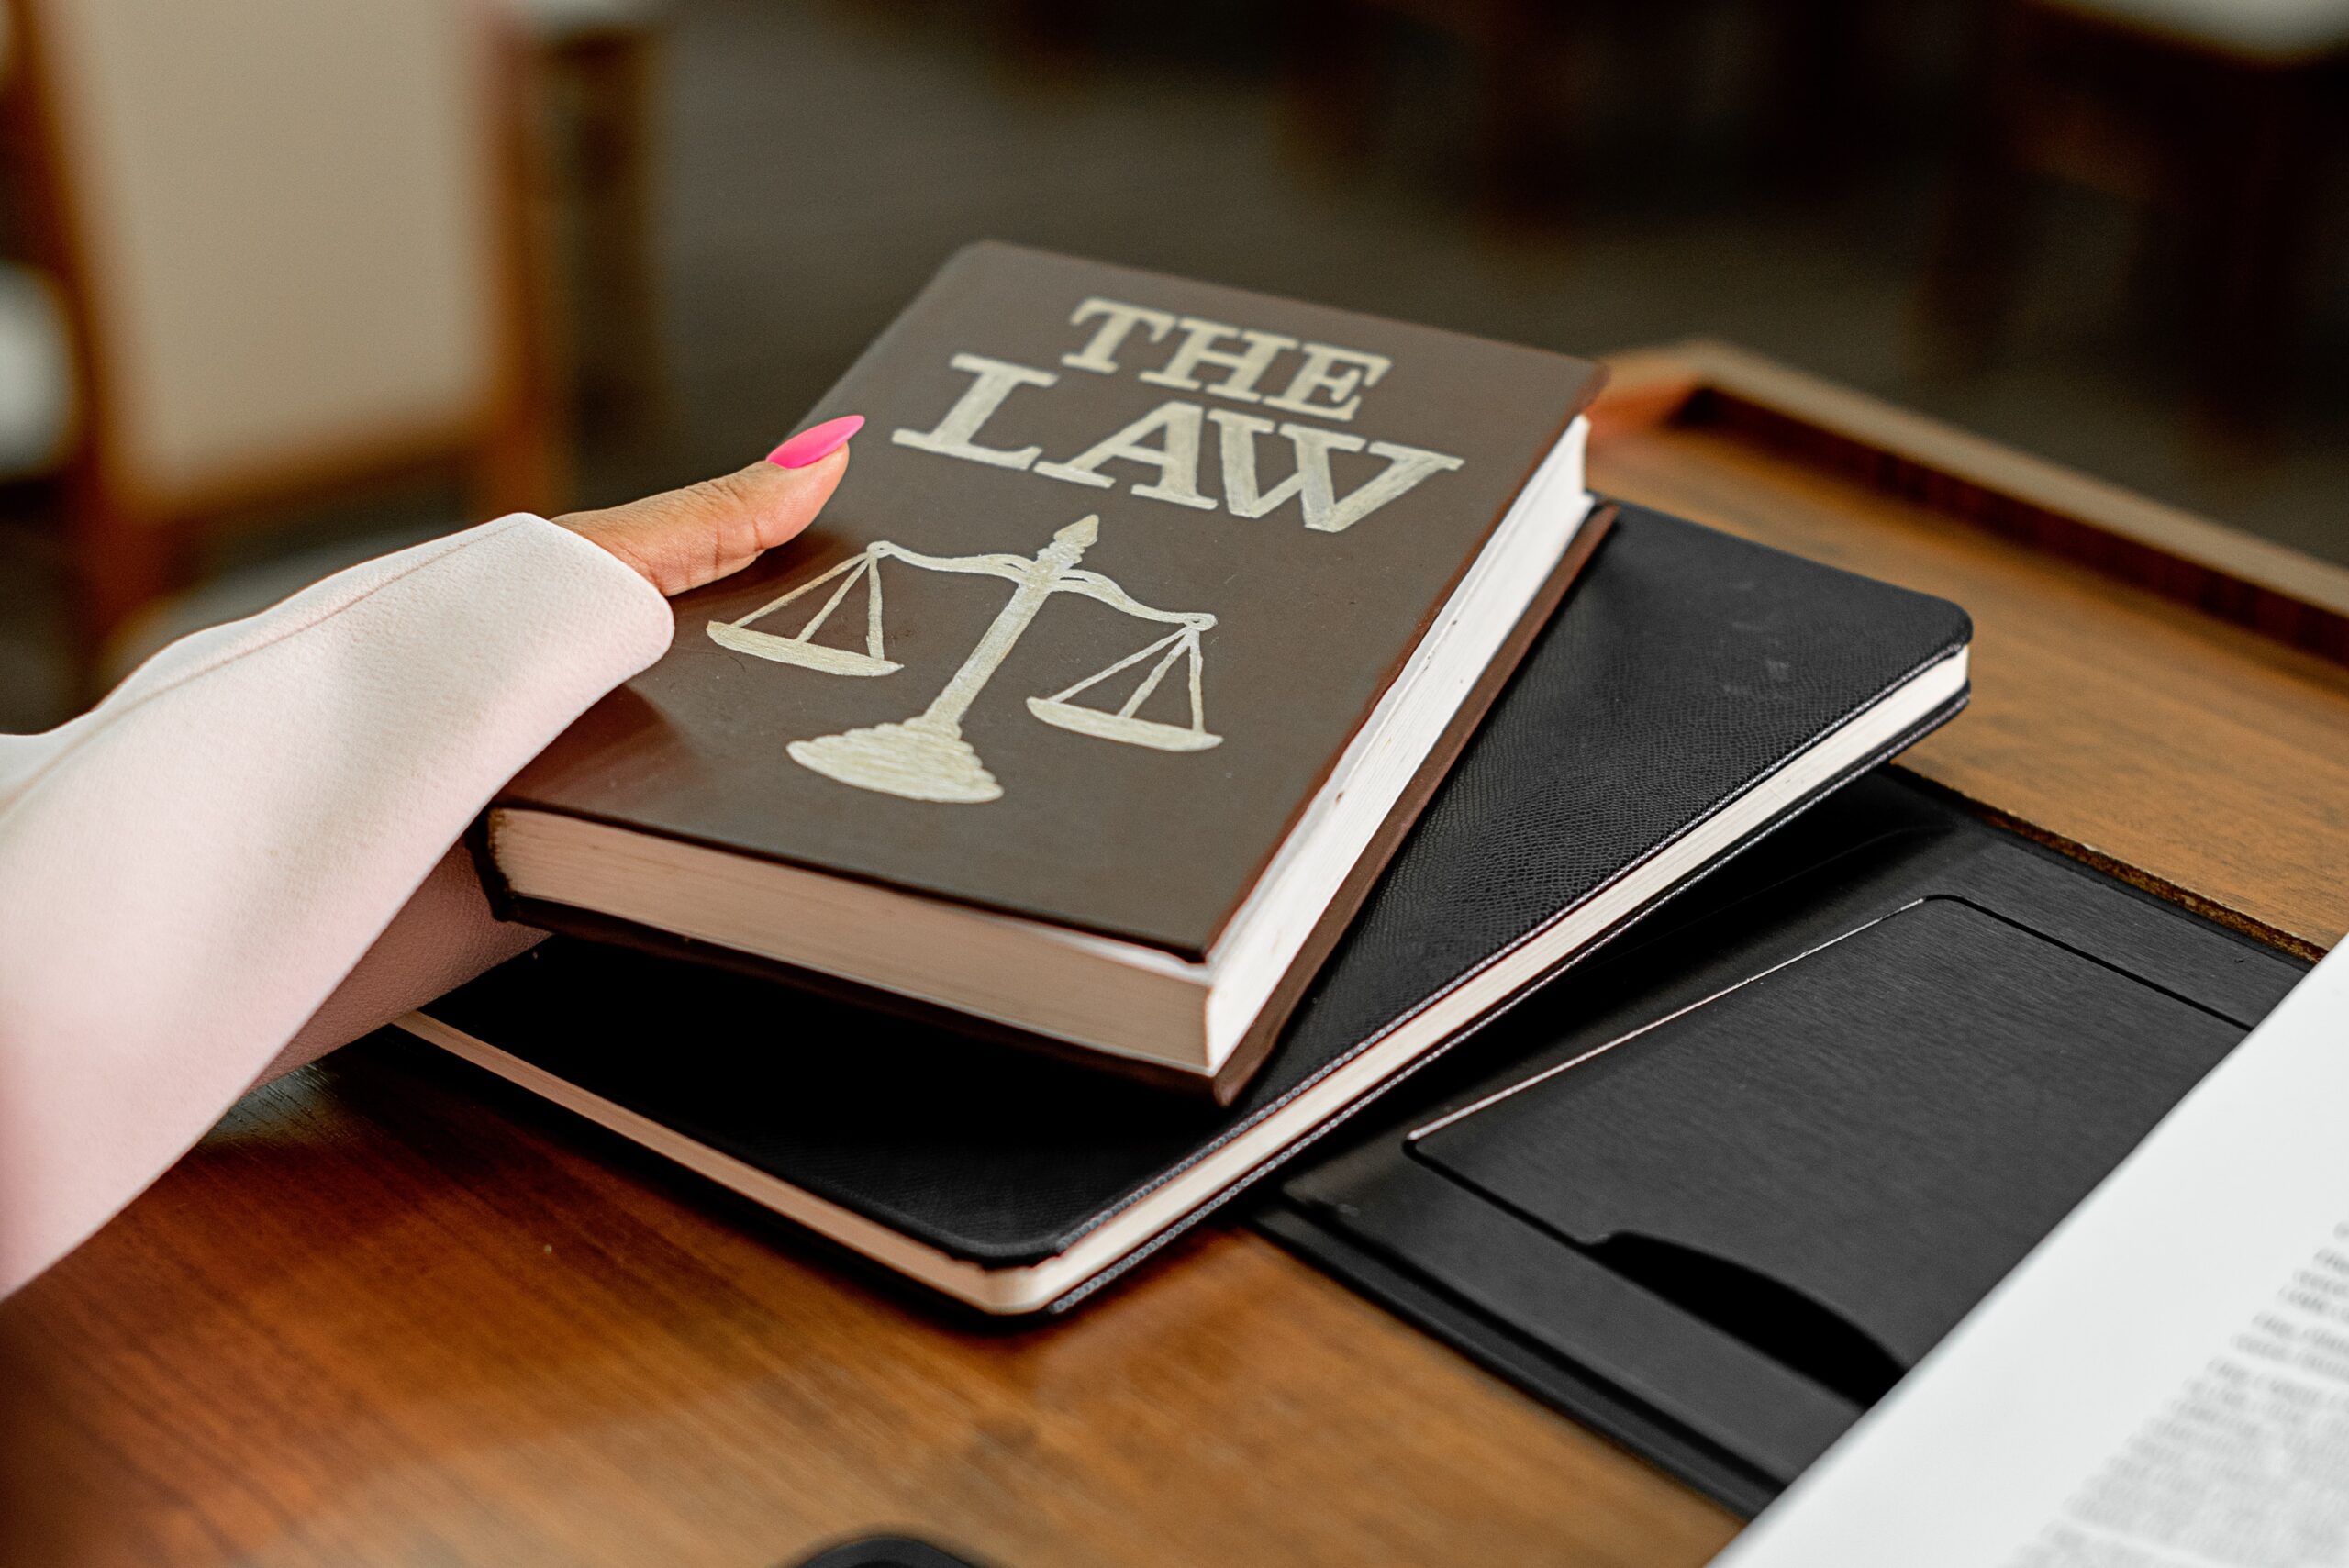 An attorney holding book with "THE LAW" boldly written on it